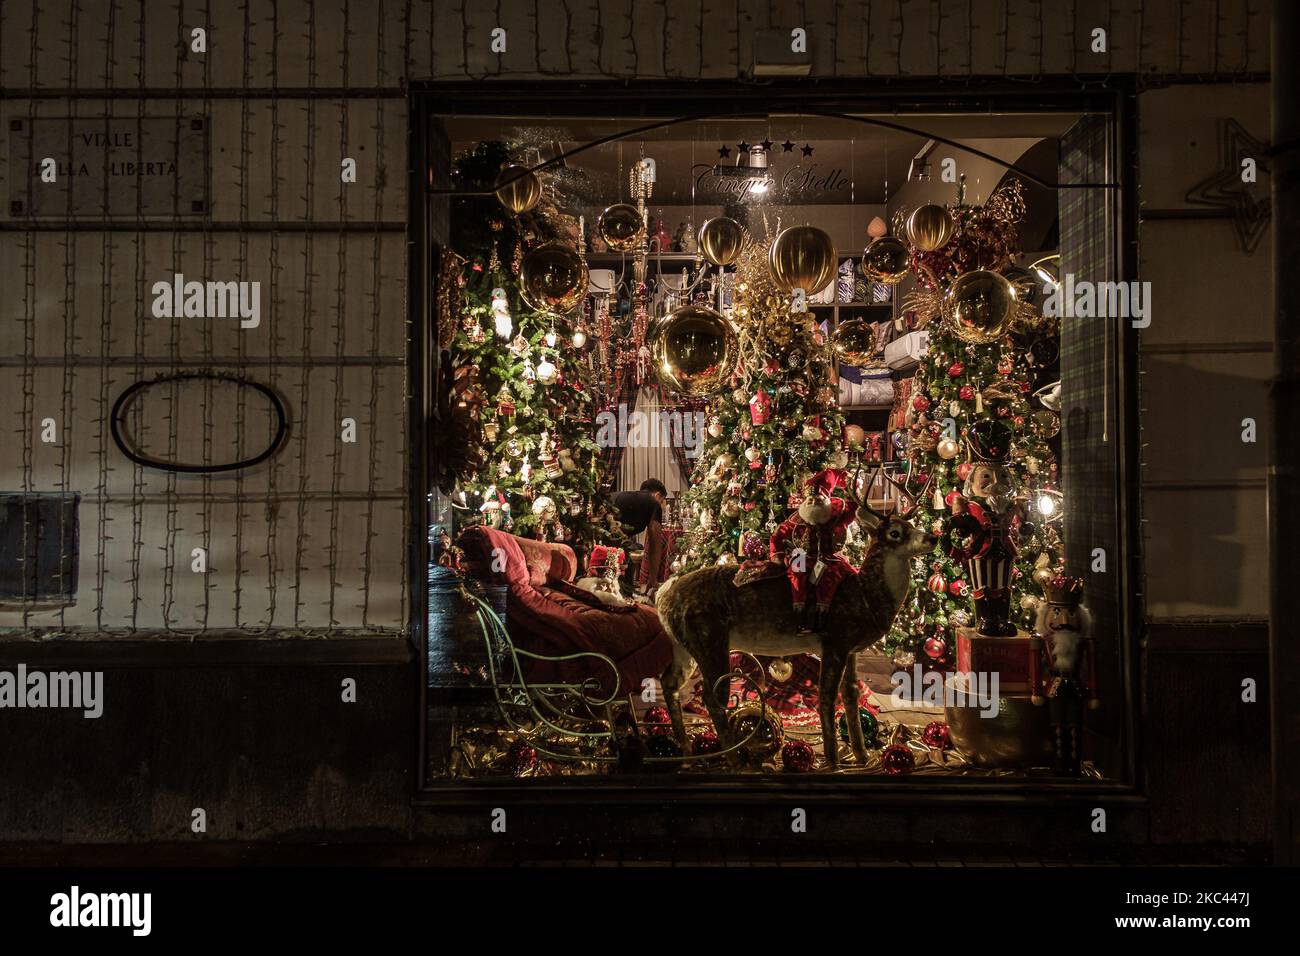 A shop window decorated for the Christmas holiday during the first day of the Red Zone in Aversa, Italy, November 15, 2020. As of today the Campania region is Zona Rossa Covid-19, Campania measures about 4000 contagions per day of Covid-19 and hospitals are collapsing. Today a call for tenders has been made for 450 doctors to fight the Coronavirus in Campania, 150 specialists in Resuscitation, 100 infectivologists, 100 in Respiratory Tract diseases and another 100 specialists in emergency surgery, announced today by the Italian Minister of Regional Affairs, Francesco Boccia. (Photo by Manuel D Stock Photo